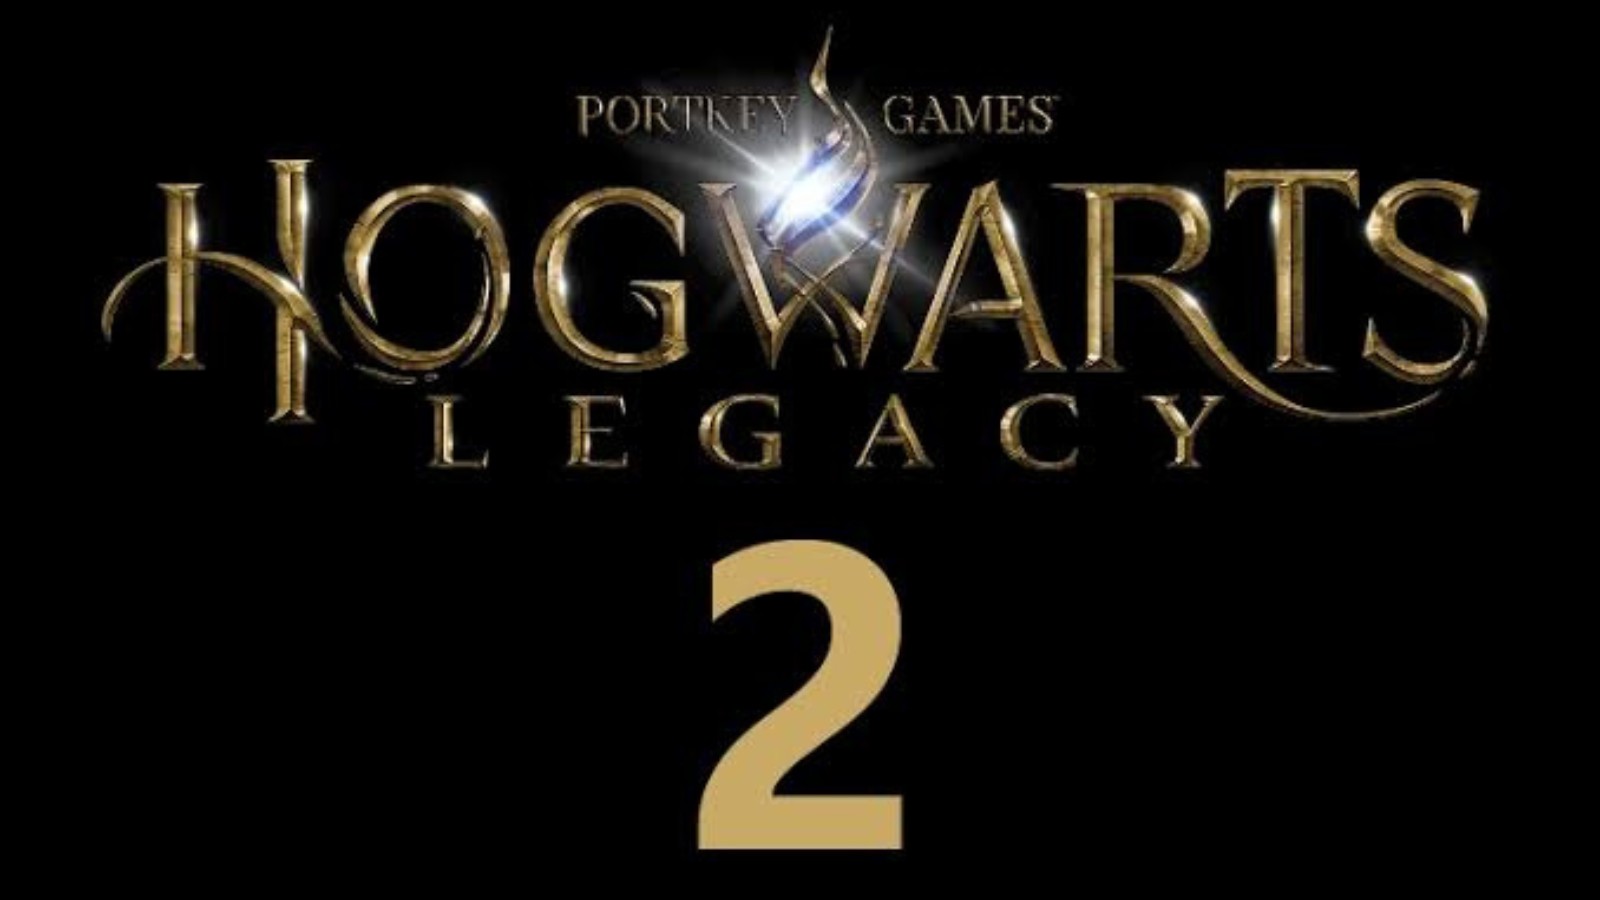 Hogwarts Legacy 2: Will There Be an Another Sequel?